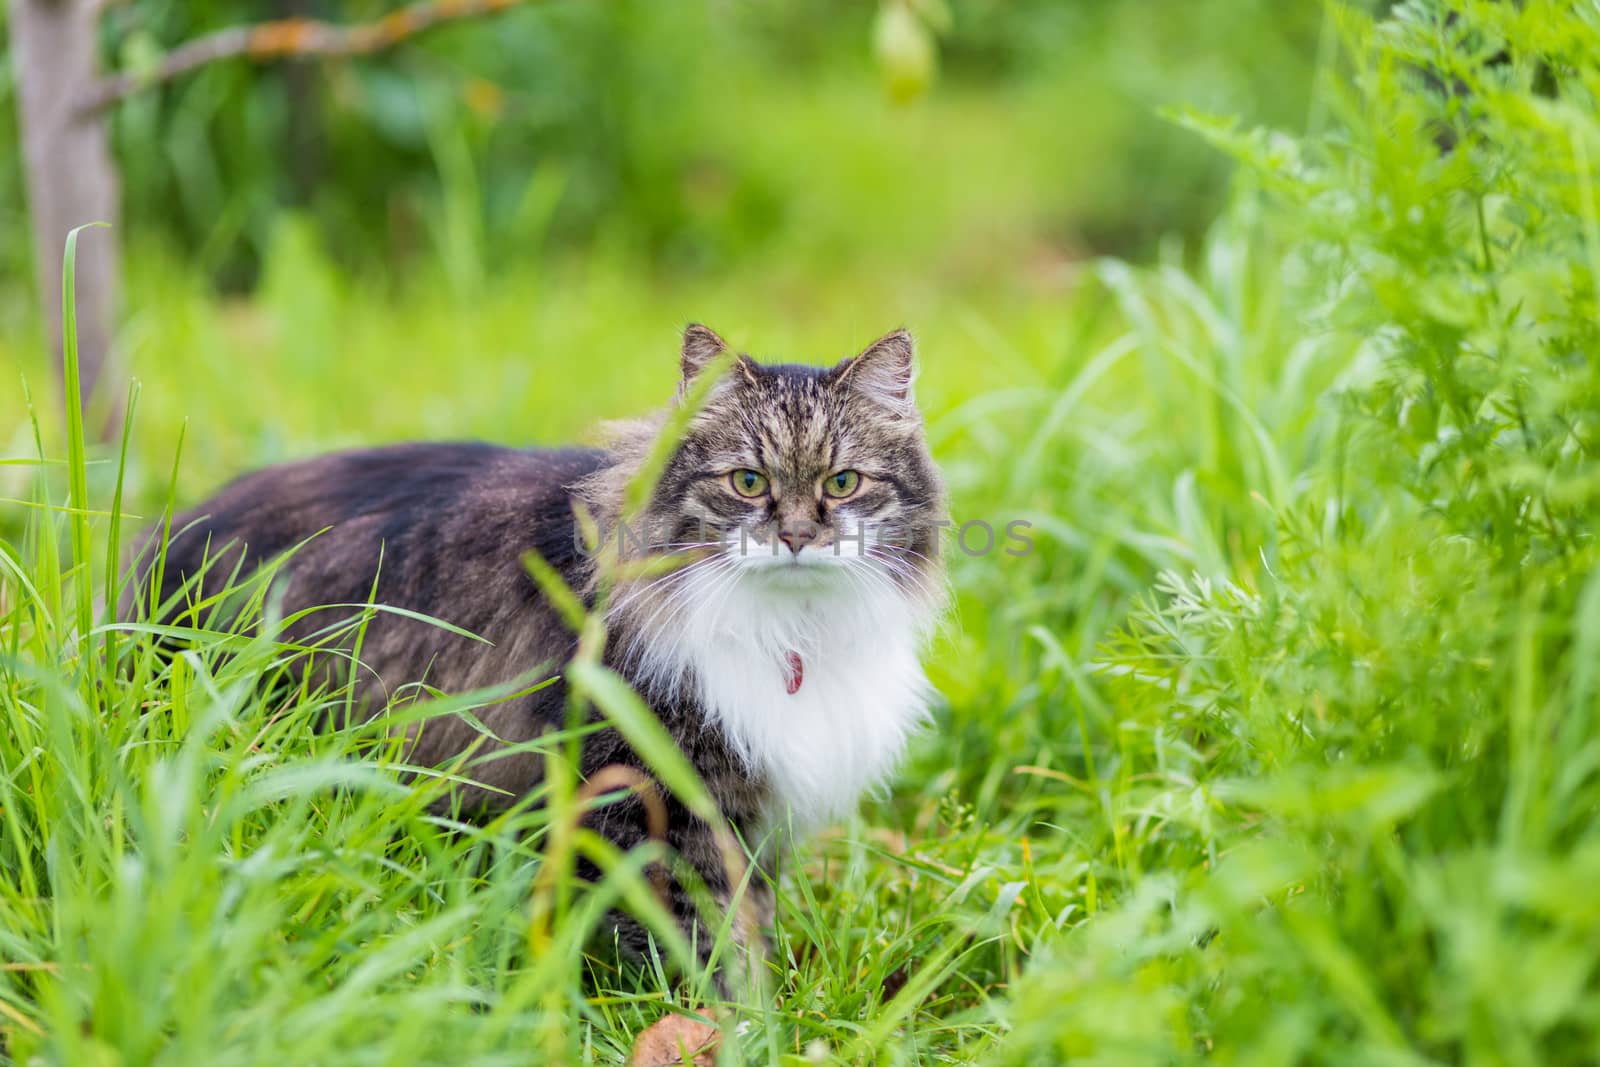 A fluffy gray cat with a luxurious white breast sits in the grass and looking at the camera